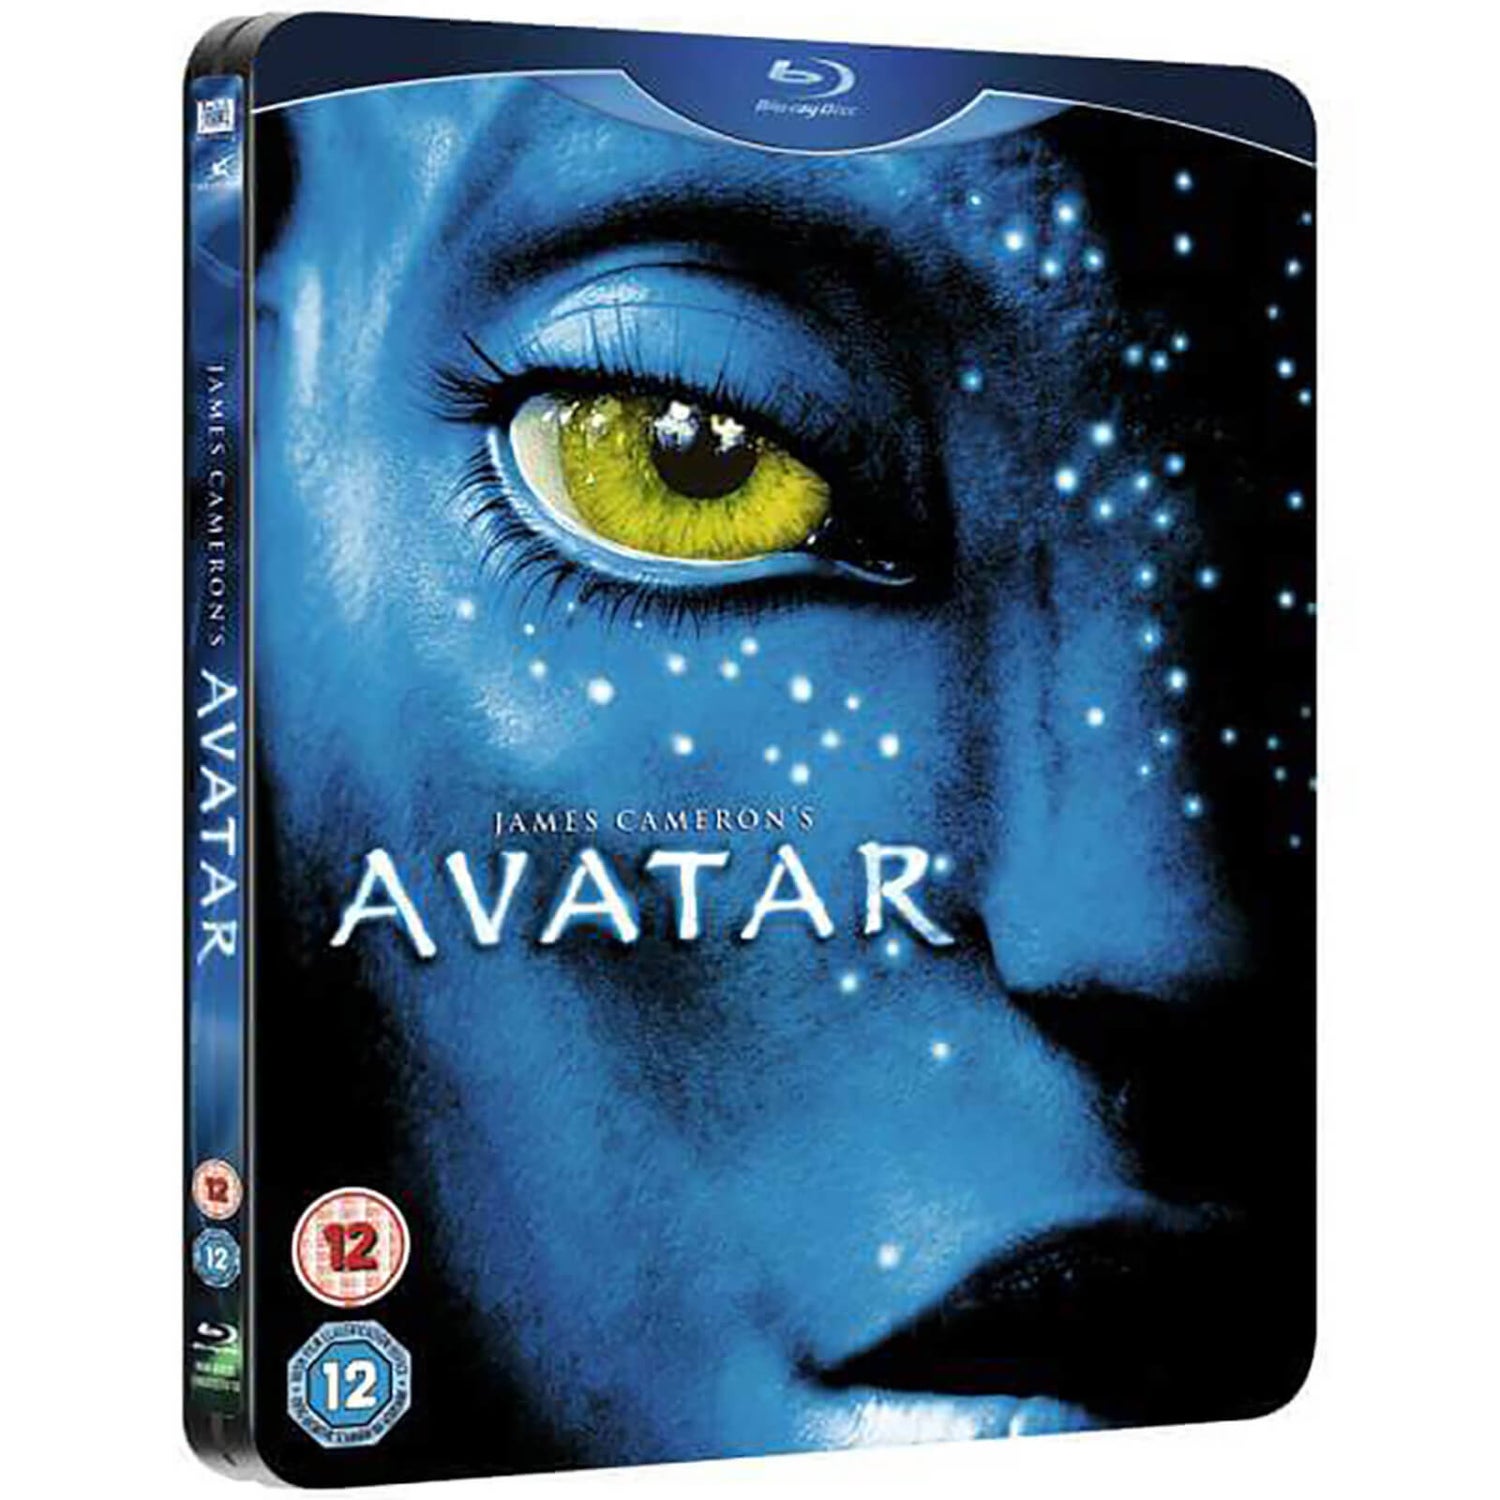 Avatar - Limited Edition Steelbook (Includes DVD) (UK EDITION)